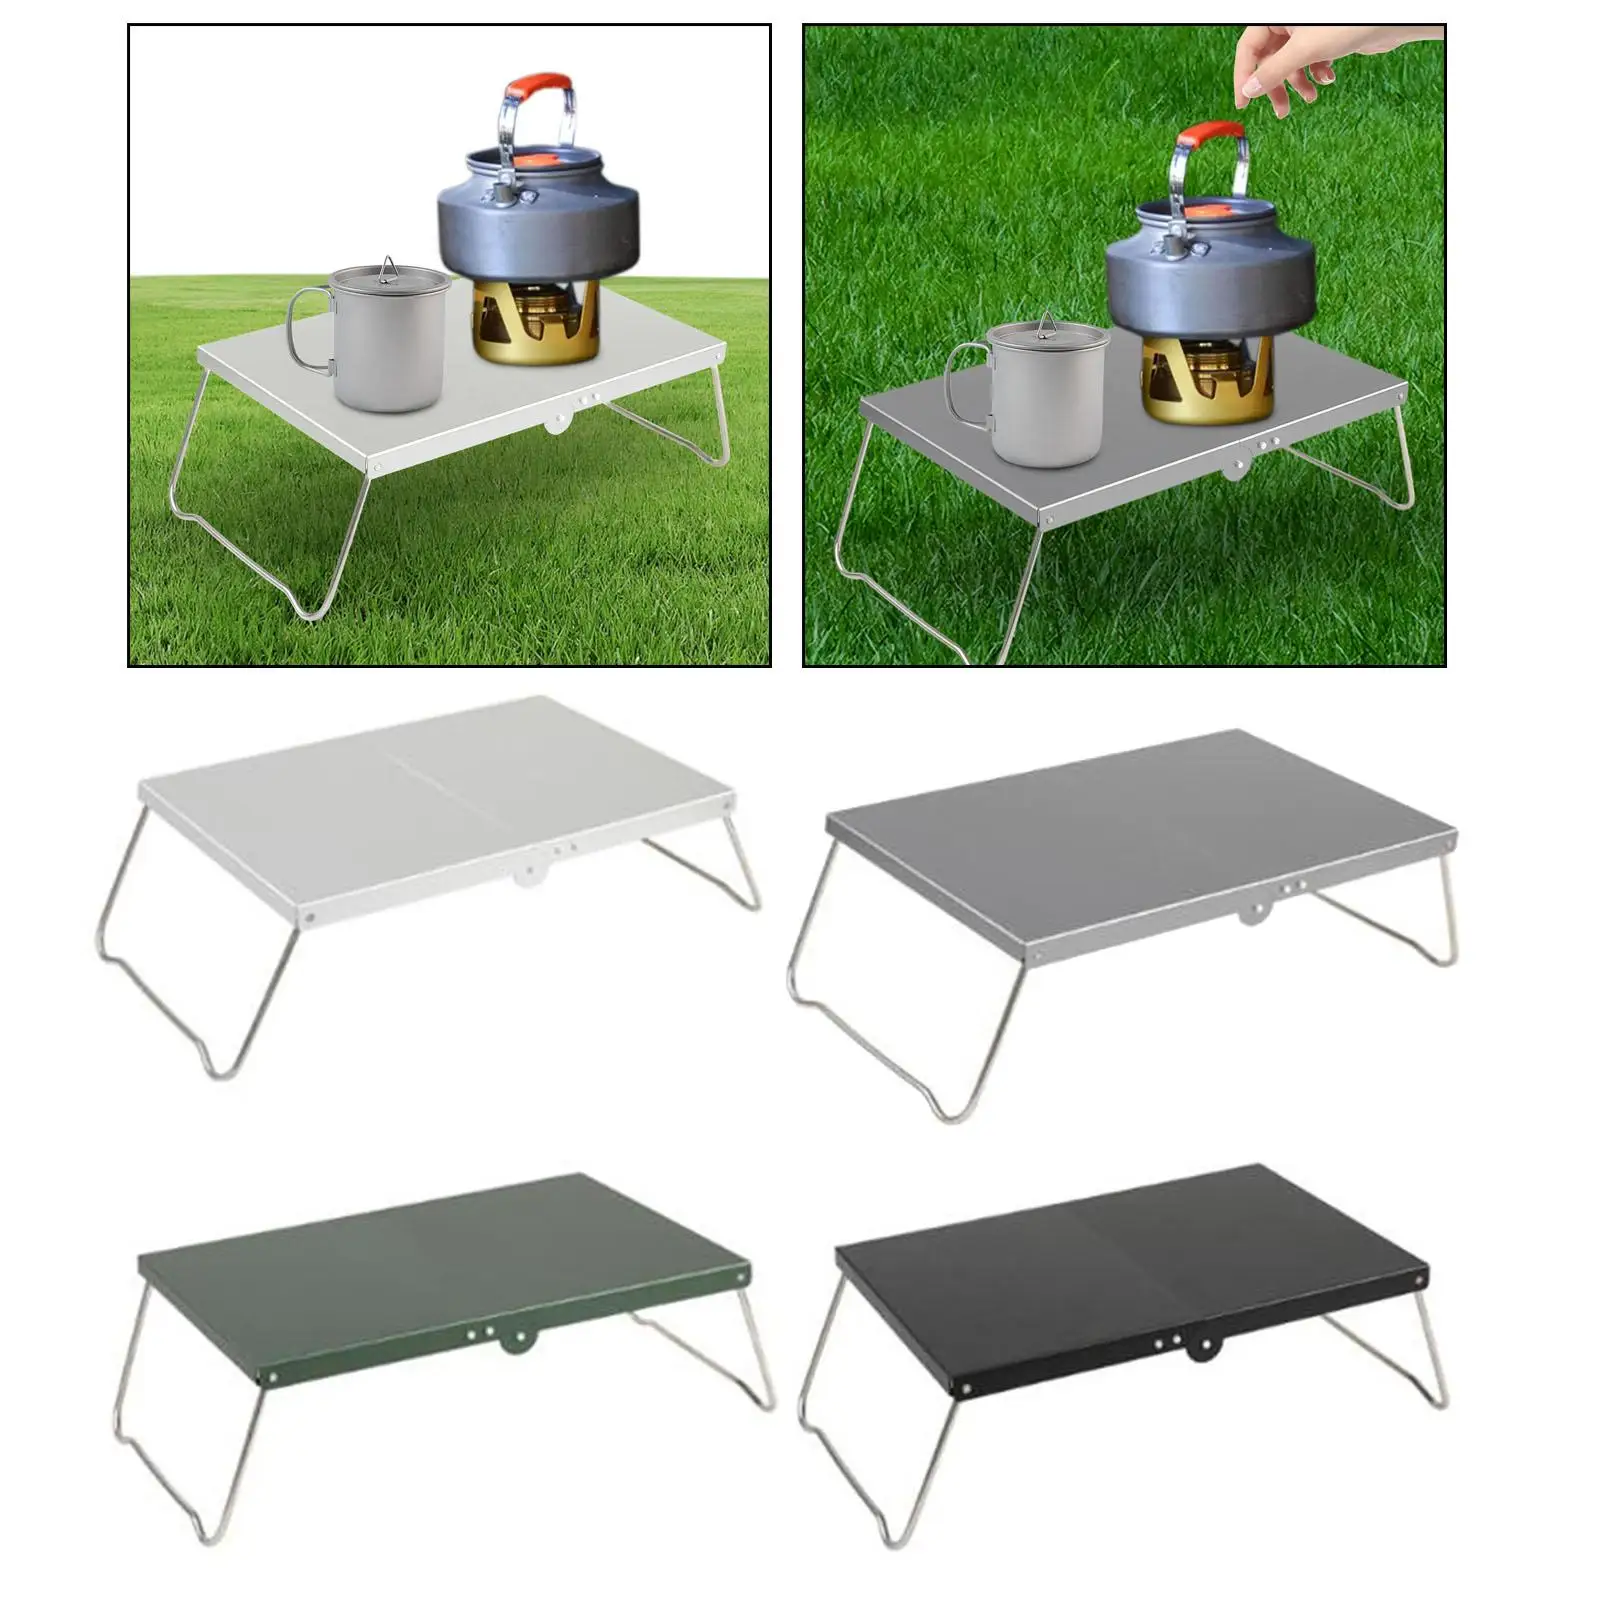 Camping Folding Table Portable Foldable Table for Barbecue Travel Yard